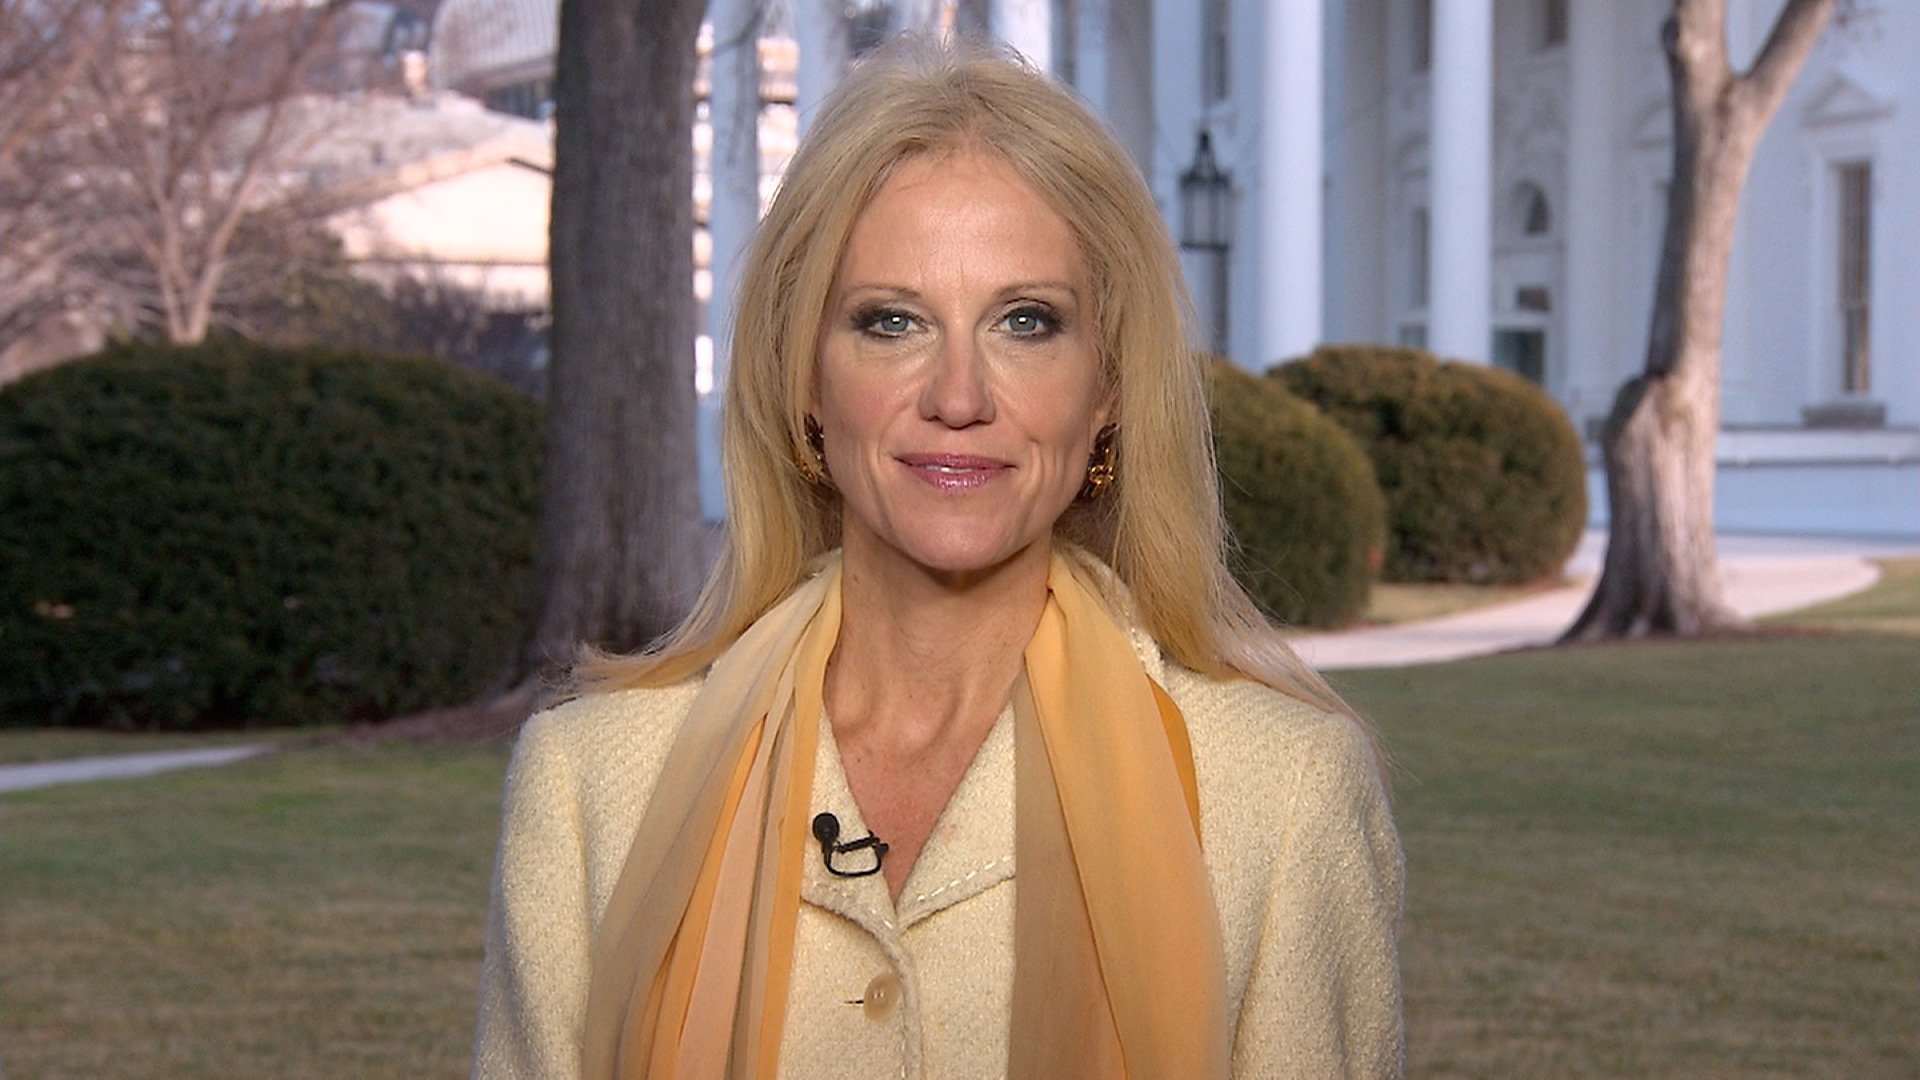 Kellyanne Conway, a top adviser to President Donald Trump, was "counseled" after promoting Ivanka Trump's clothing and accessory brand during an interview from the White House Thursday morning.


File- Kellyanne Conway speaks to CNN's Jake Tapper on February 7, 2017.